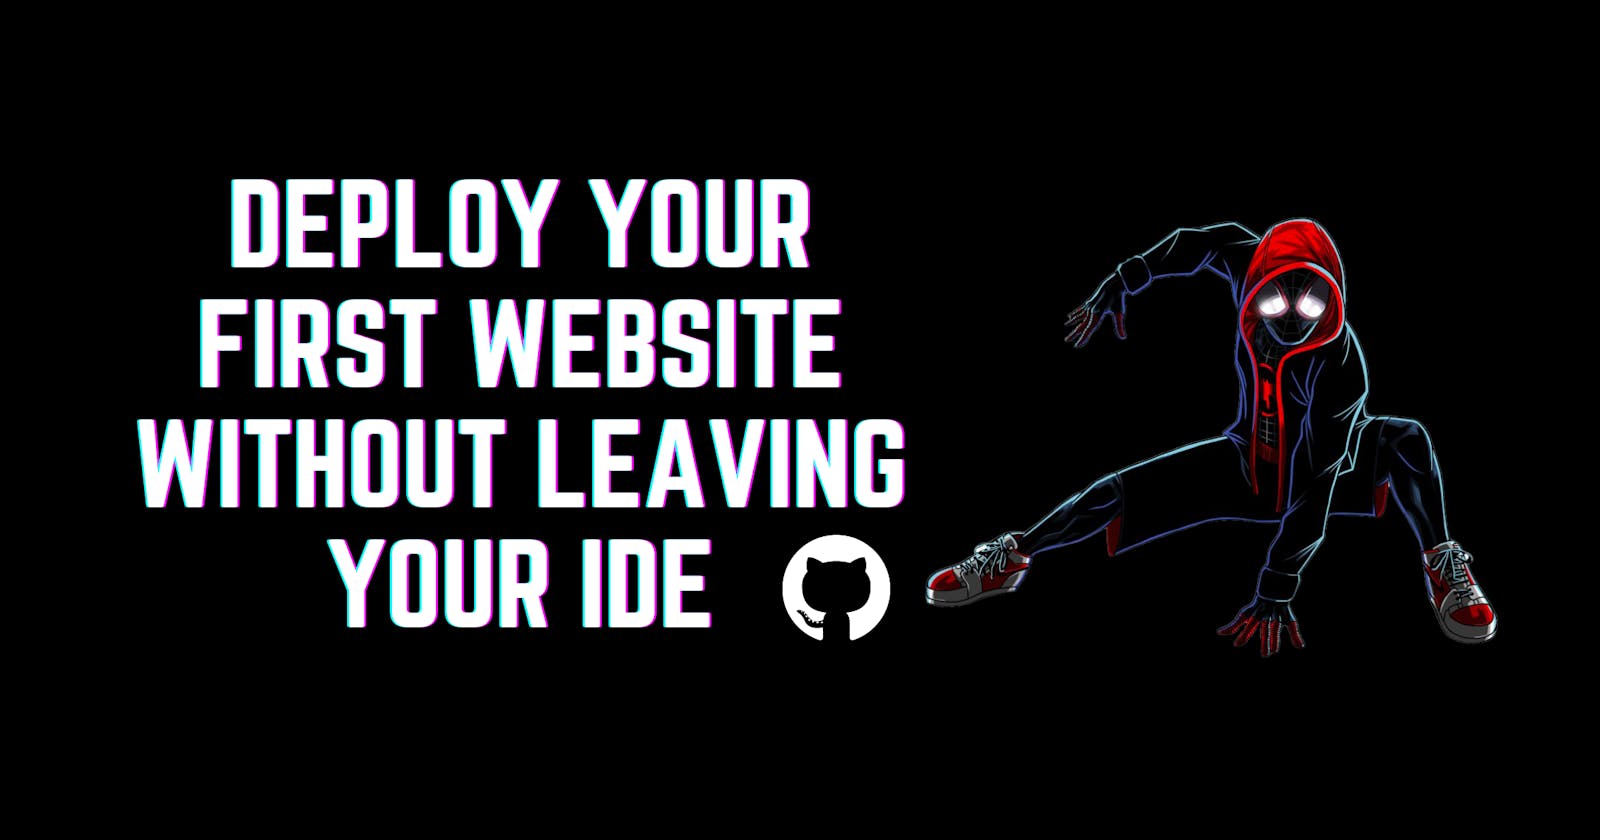 Deploy Your First Website without Leaving Your IDE